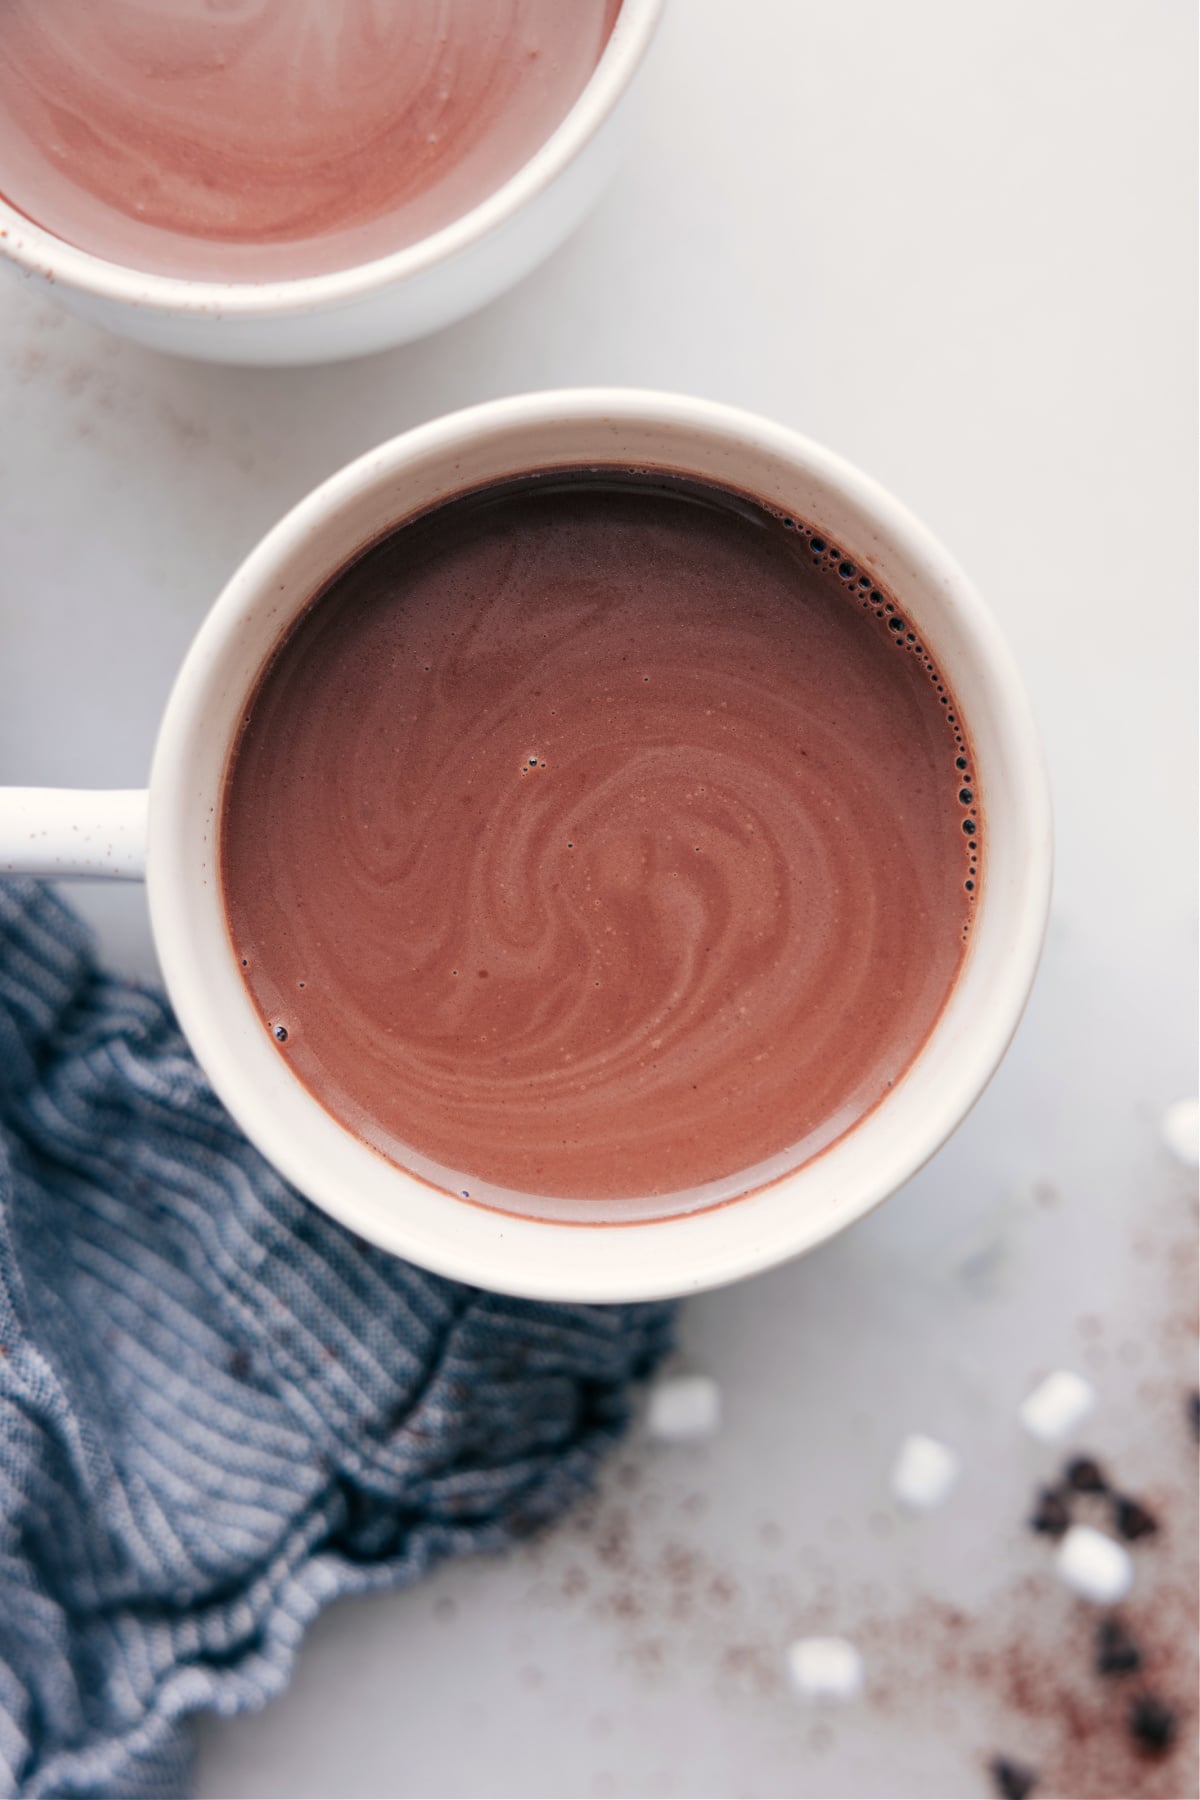 A cup of steaming, swirling hot chocolate, perfectly prepared and ready for enjoyment.